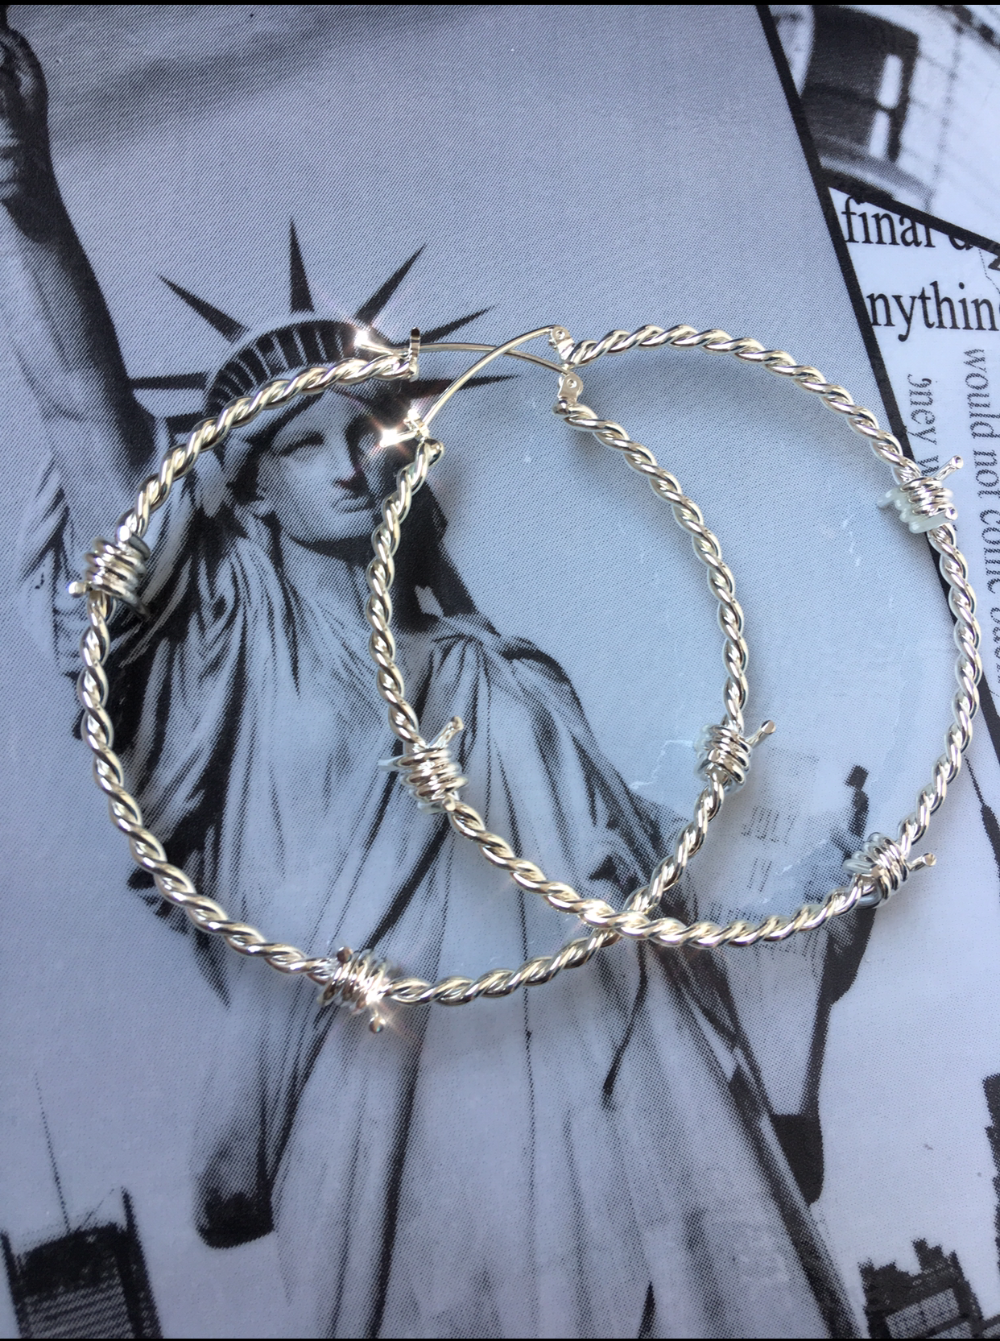 The Kabul House Essential Barb Wire Hoops - Blingistan, silver barbwire earrings on statue of liberty print.